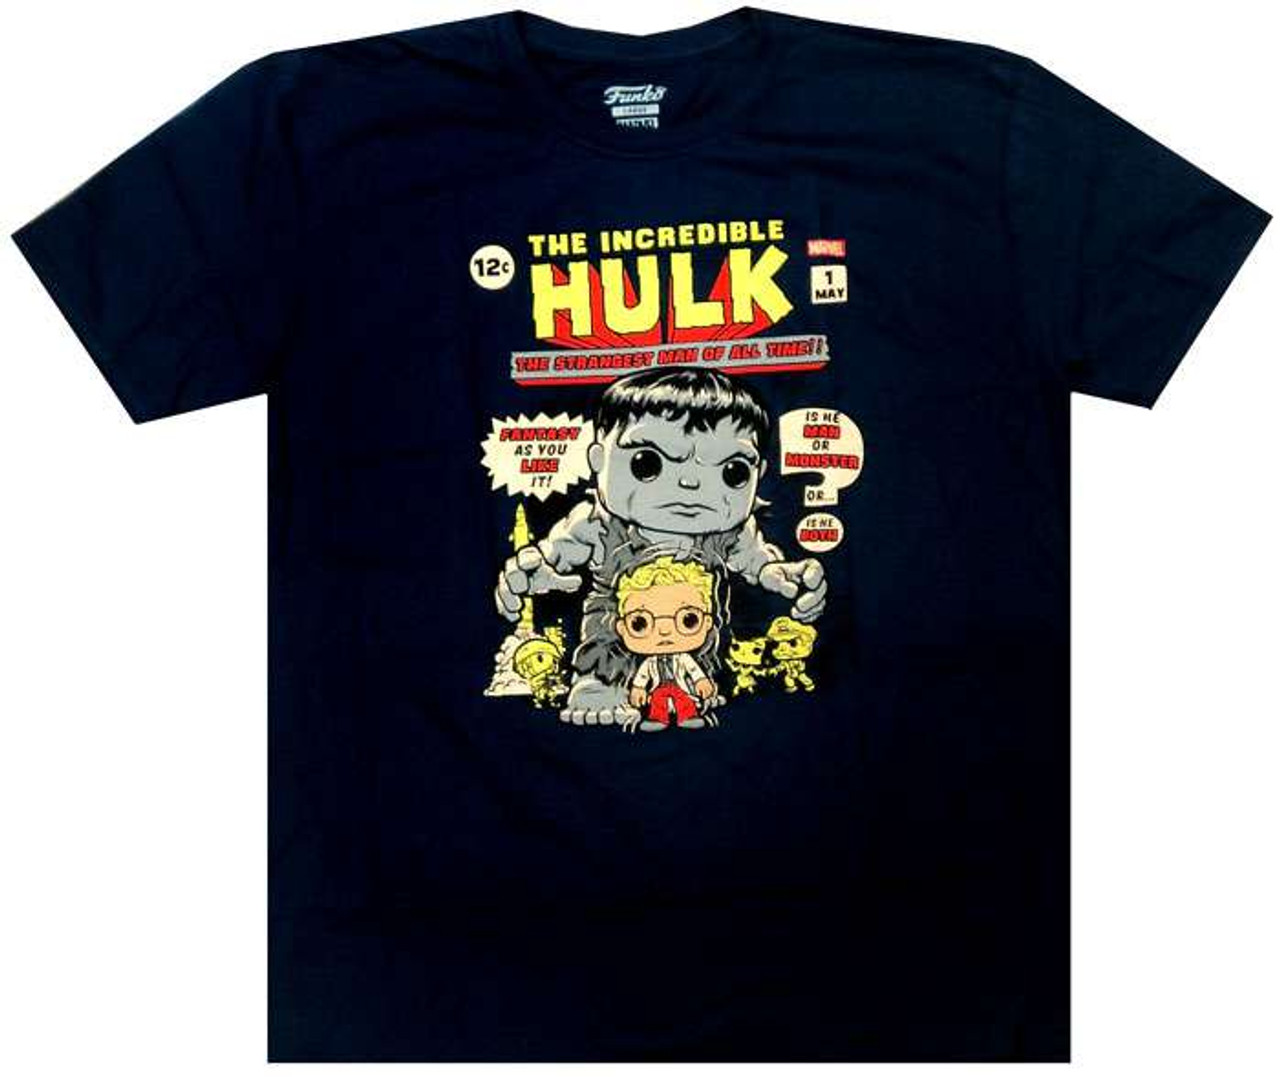 Funko Marvel Marvel Collector Corps Hulk 1st Appearance Exclusive T Shirt 2x Large Toywiz - project zorgo roblox t shirt